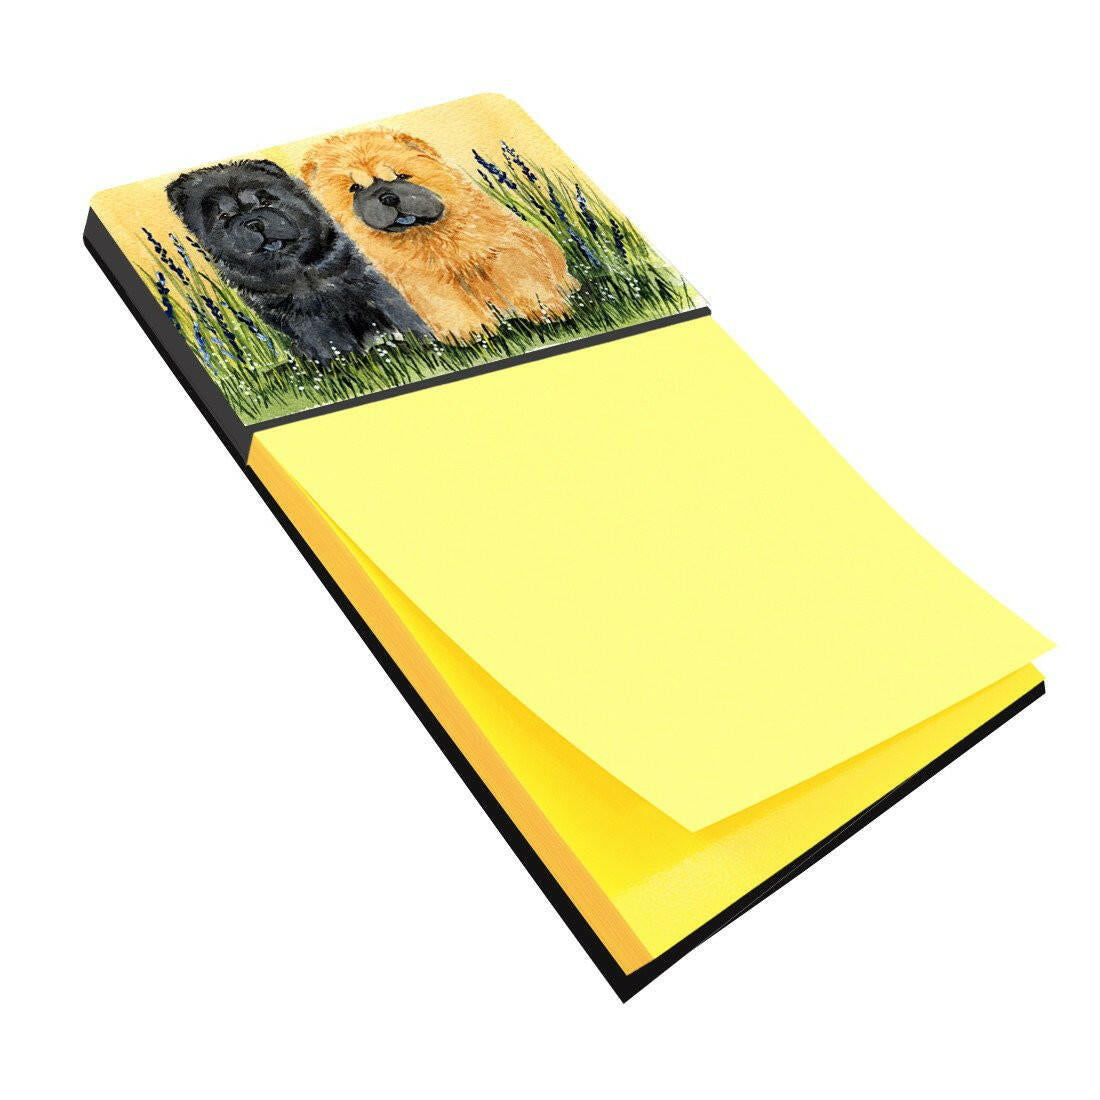 Chow Chow Refiillable Sticky Note Holder or Postit Note Dispenser SS7006SN by Caroline's Treasures